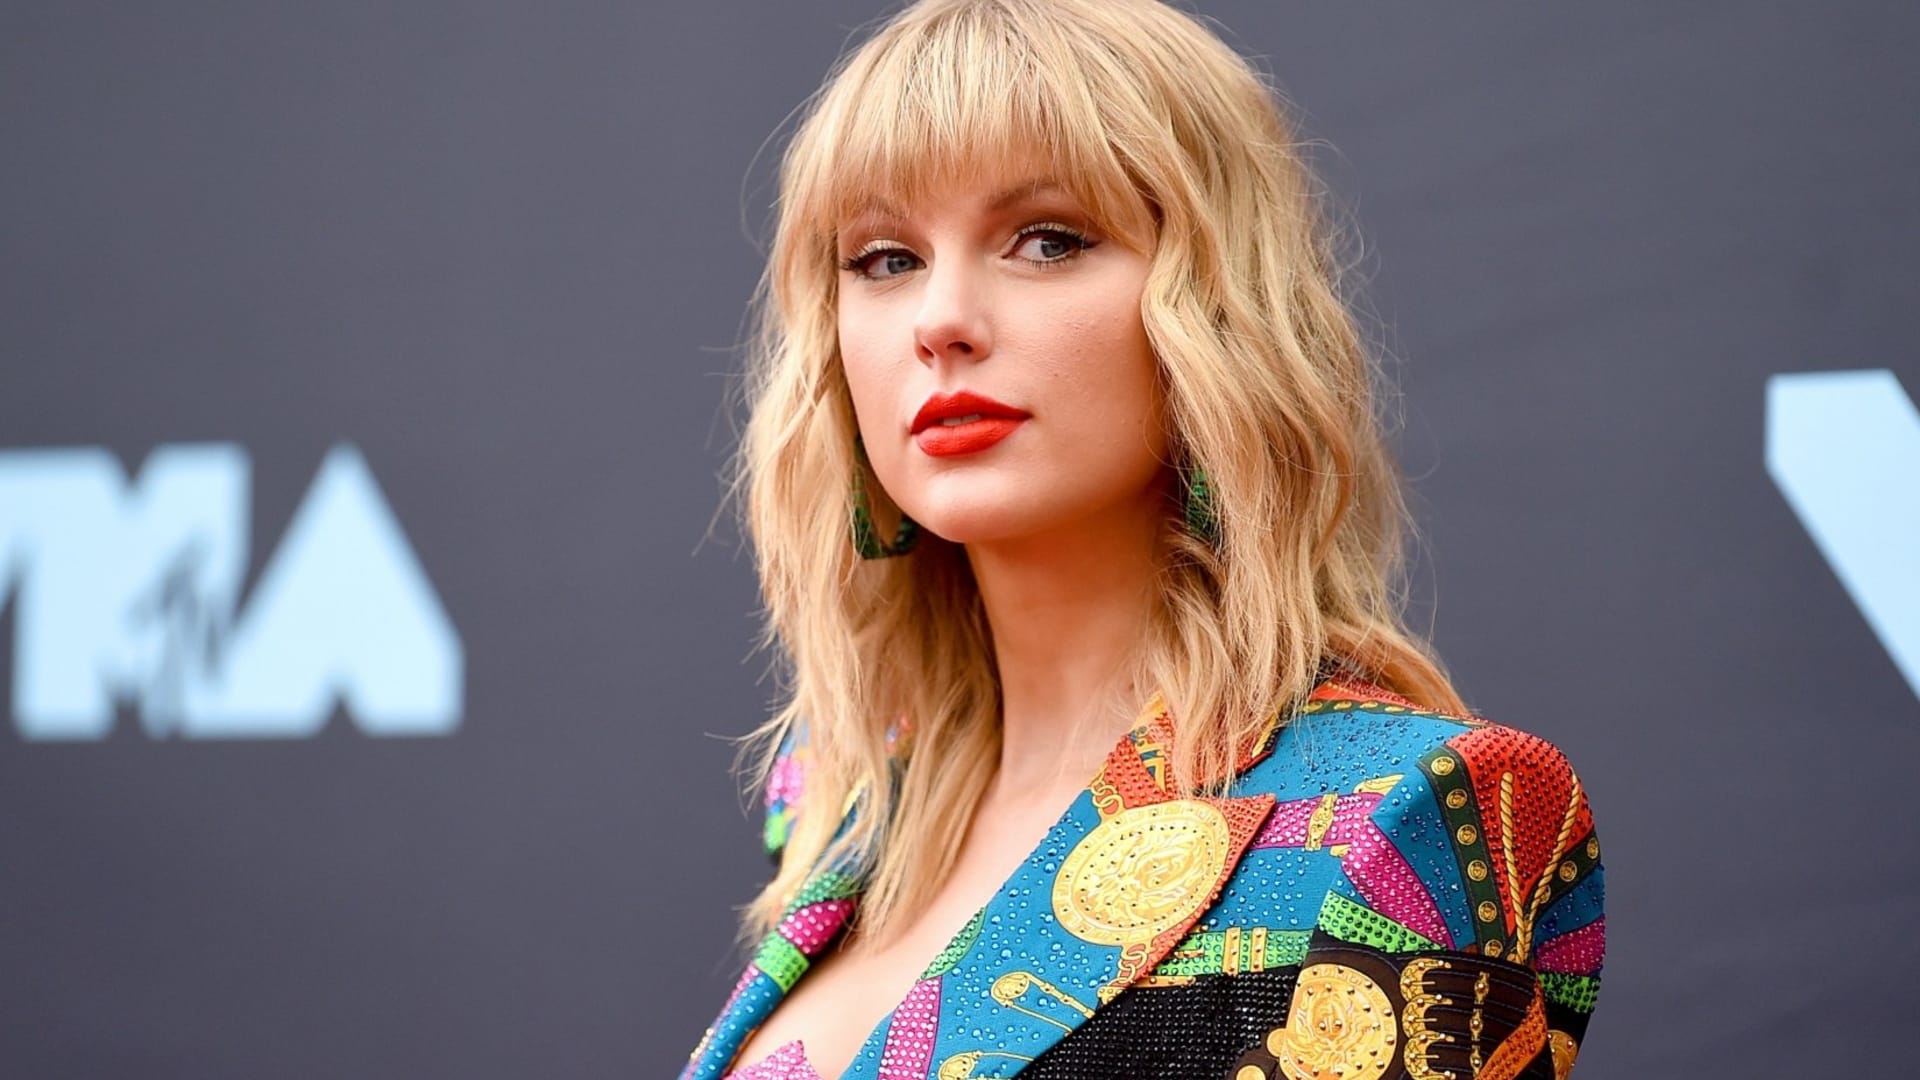 Taylor Swift Just Announced an Unusual Bonus Track Strategy, and It's a Brilliant Marketing Move